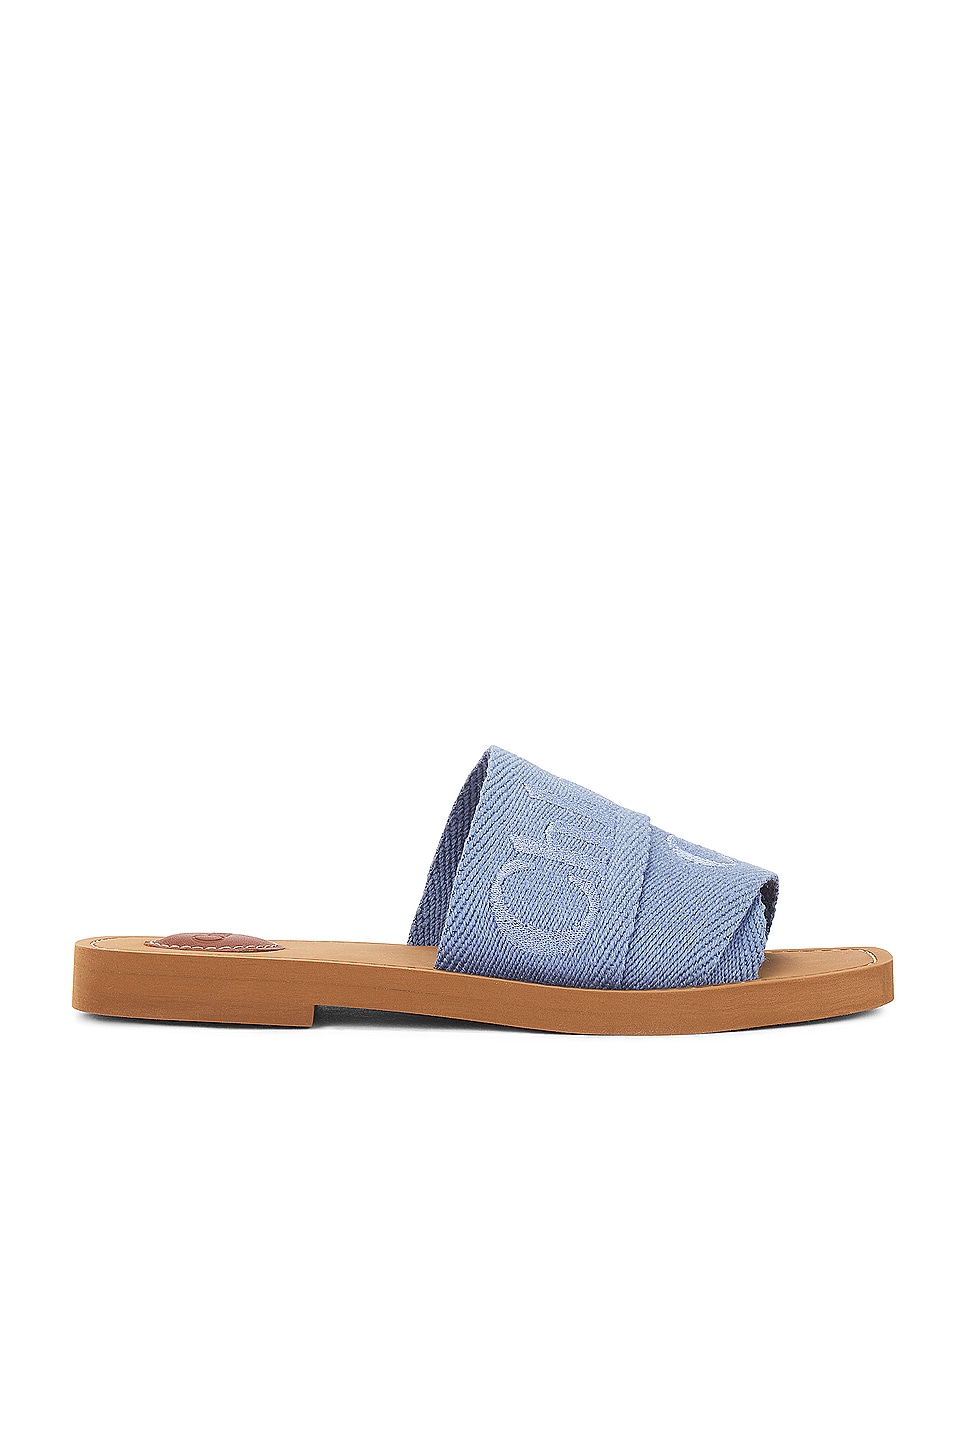 Image 1 of Chloe Woody Sandal in Washed Blue